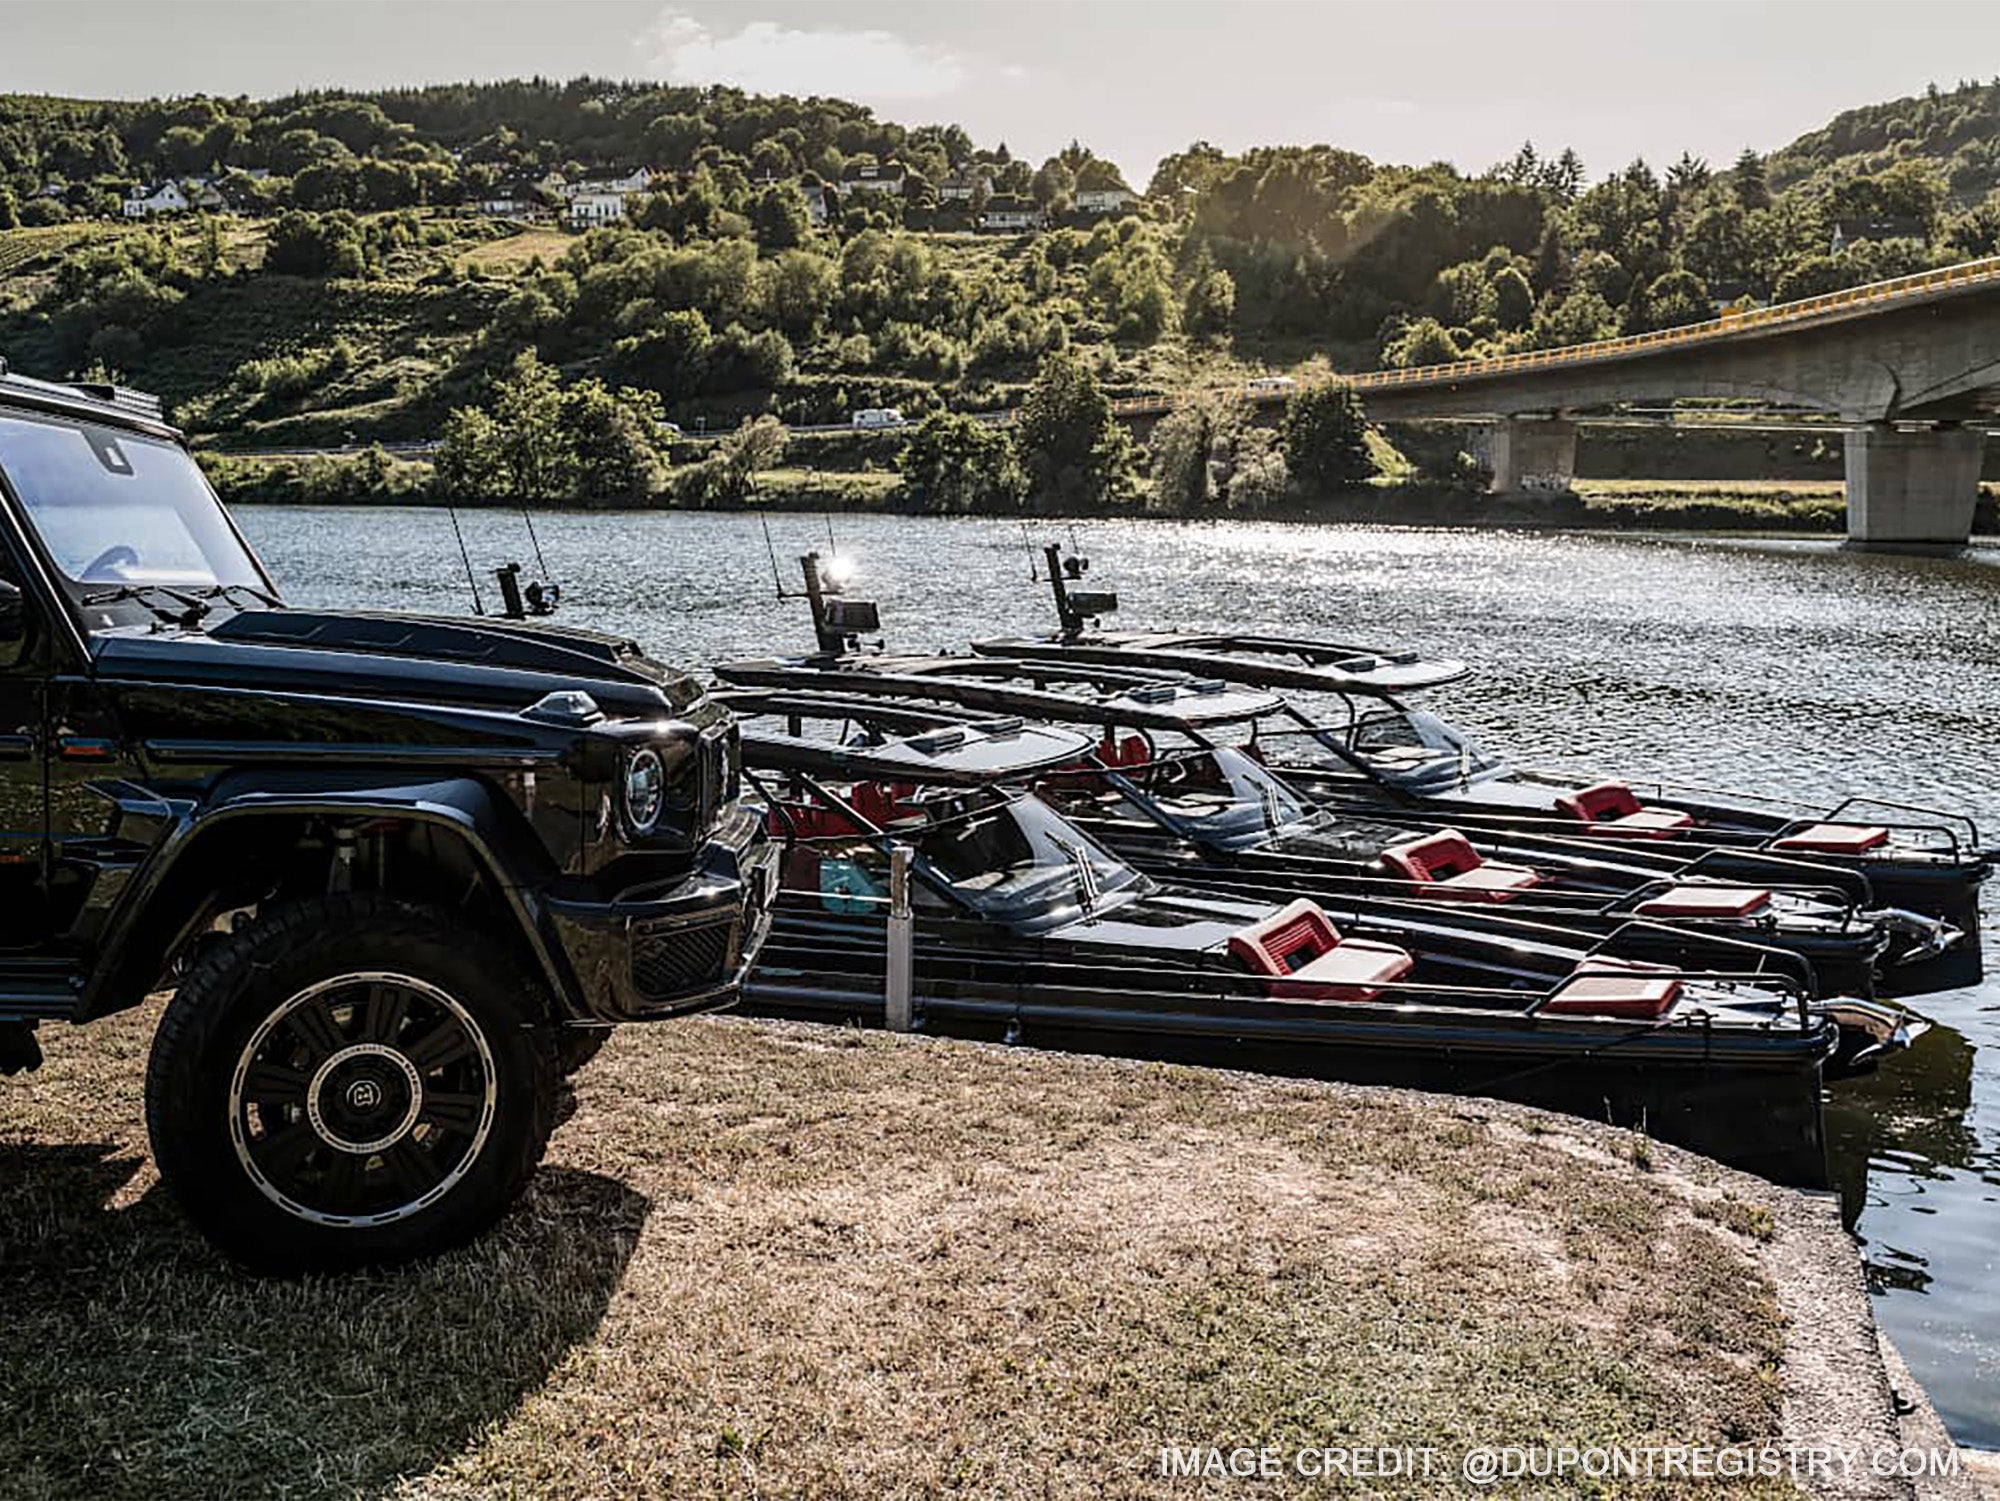 Brabus Shadow 900 Black Ops Edition Dayboat is powered by two Mercury Verado 450 engines that can reach impressive speeds